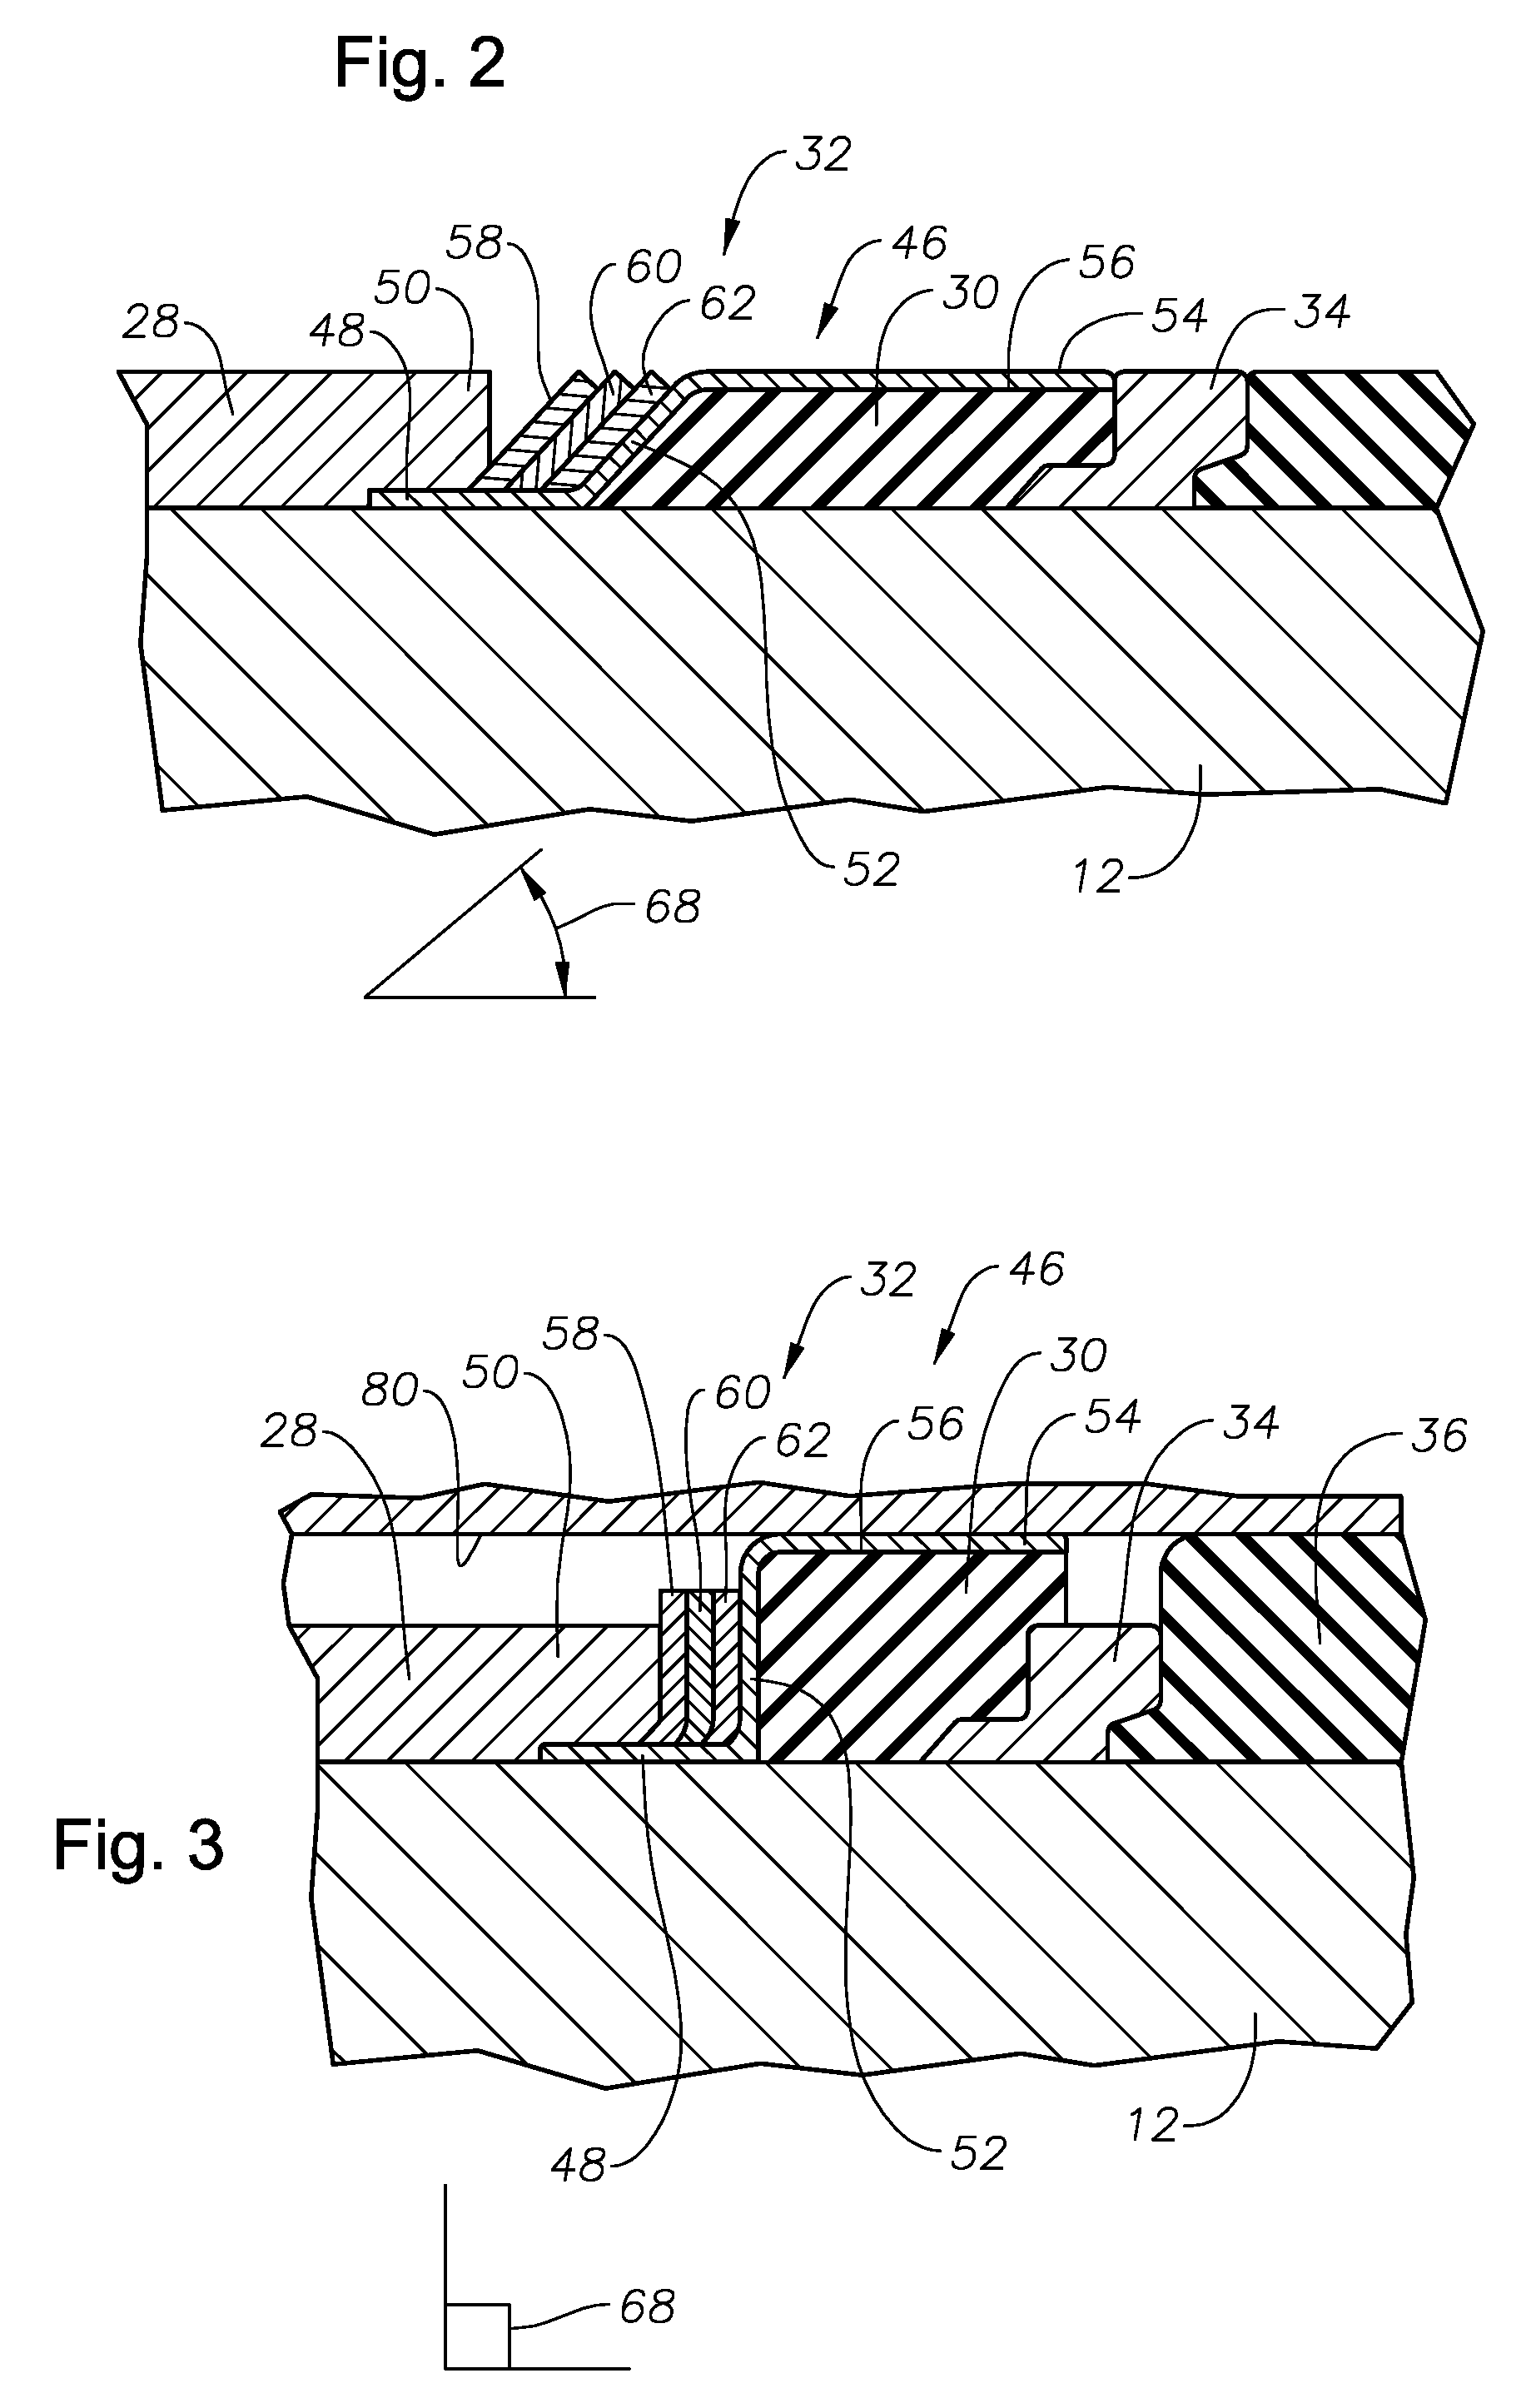 Multi-Piece Packing Element Containment System